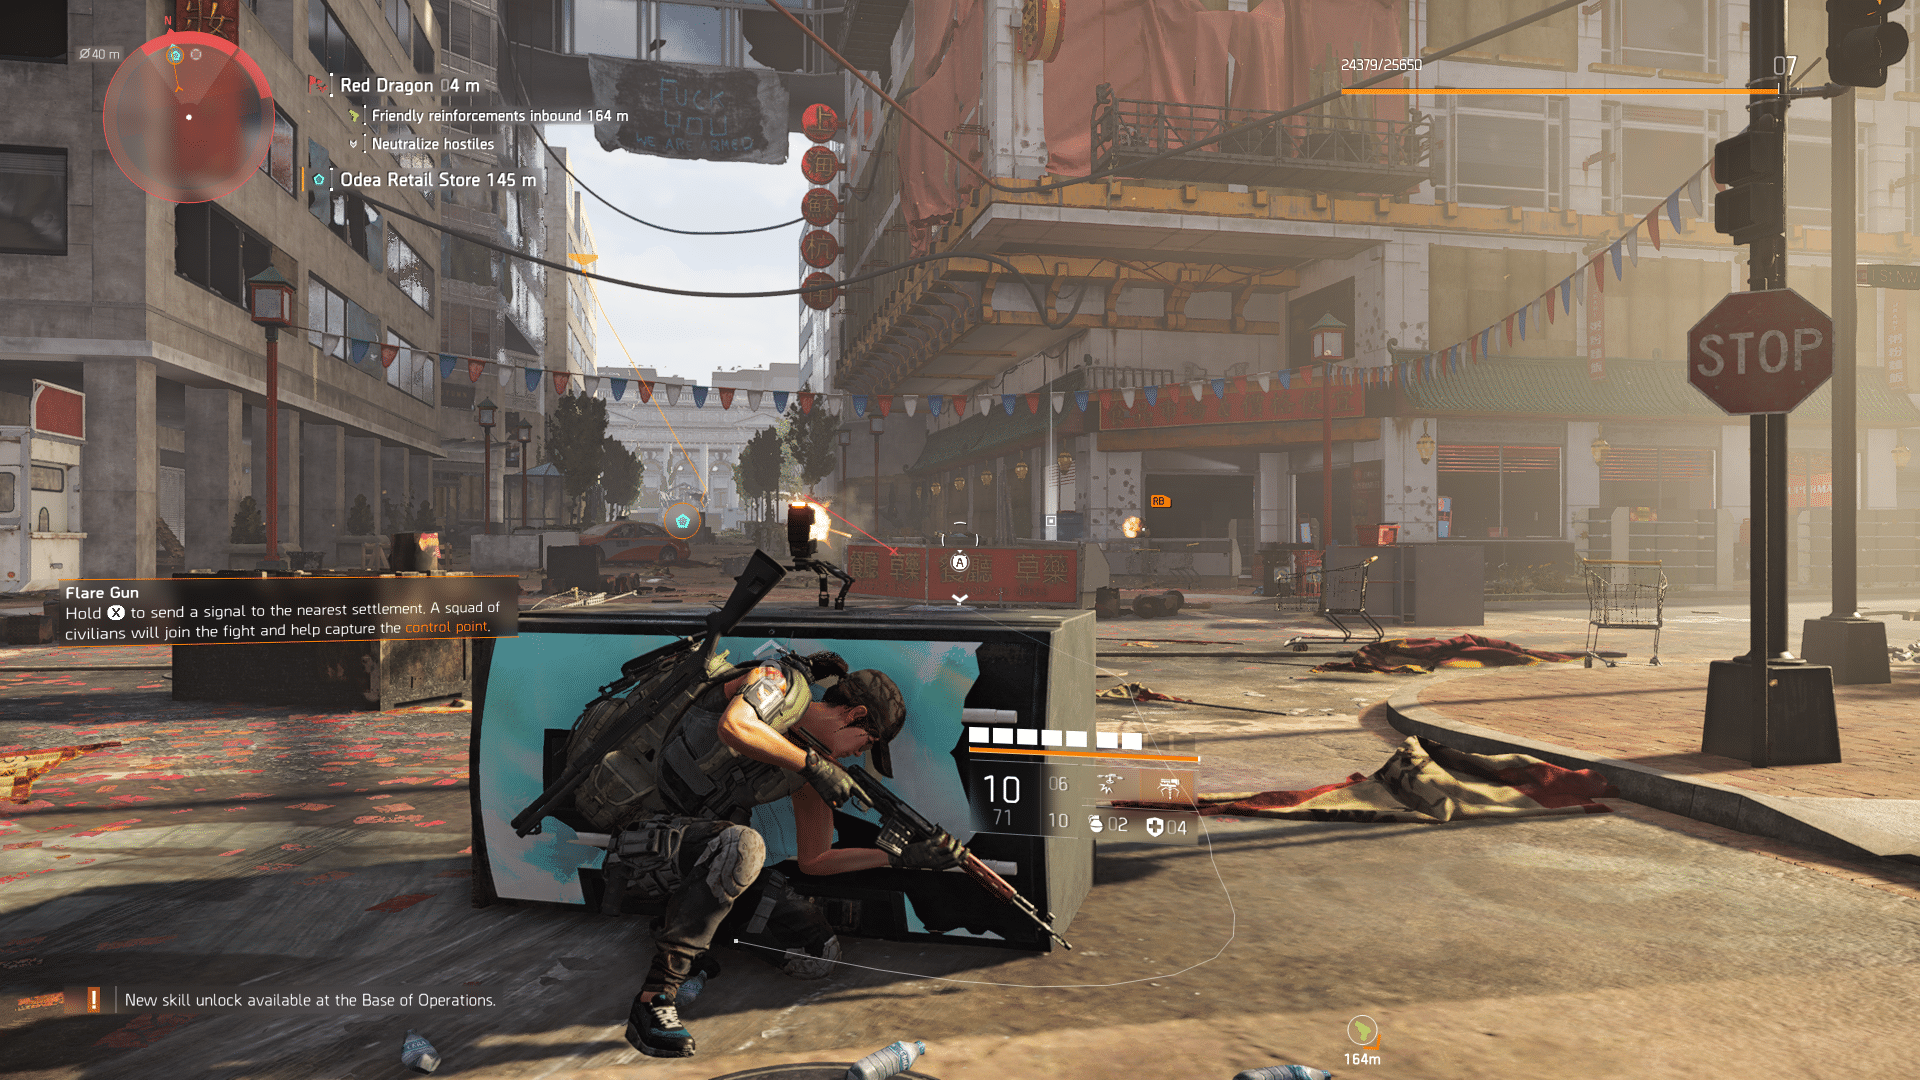 TheDivision2 3 25 2019 9 49 41 PM 346